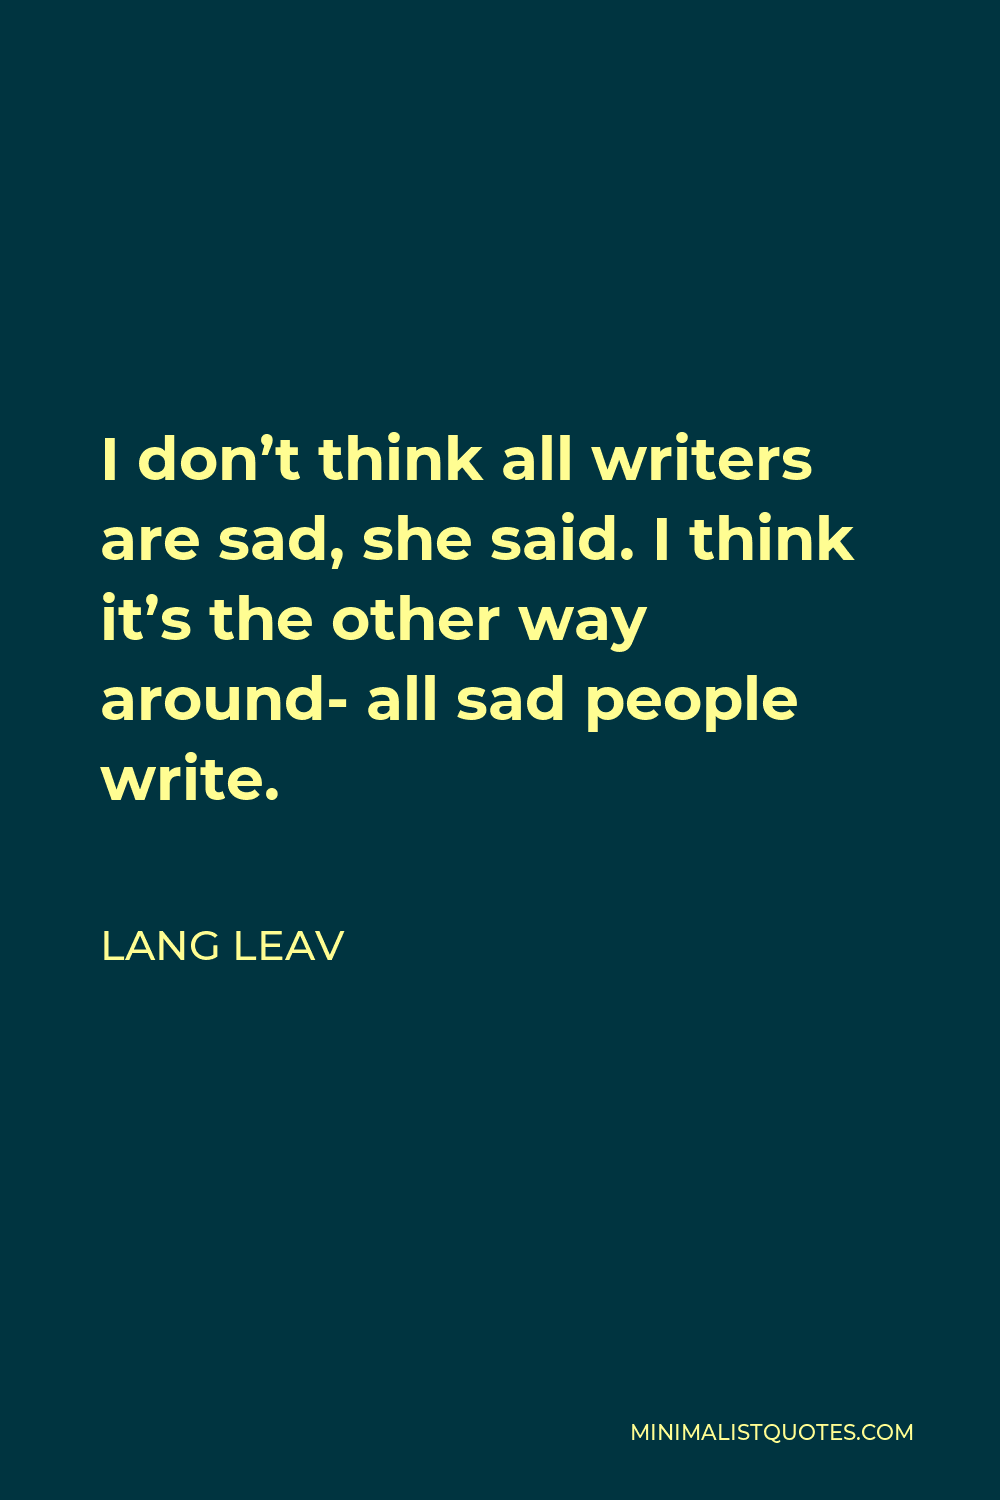 Lang Leav Quote - I don’t think all writers are sad, she said. I think it’s the other way around- all sad people write.